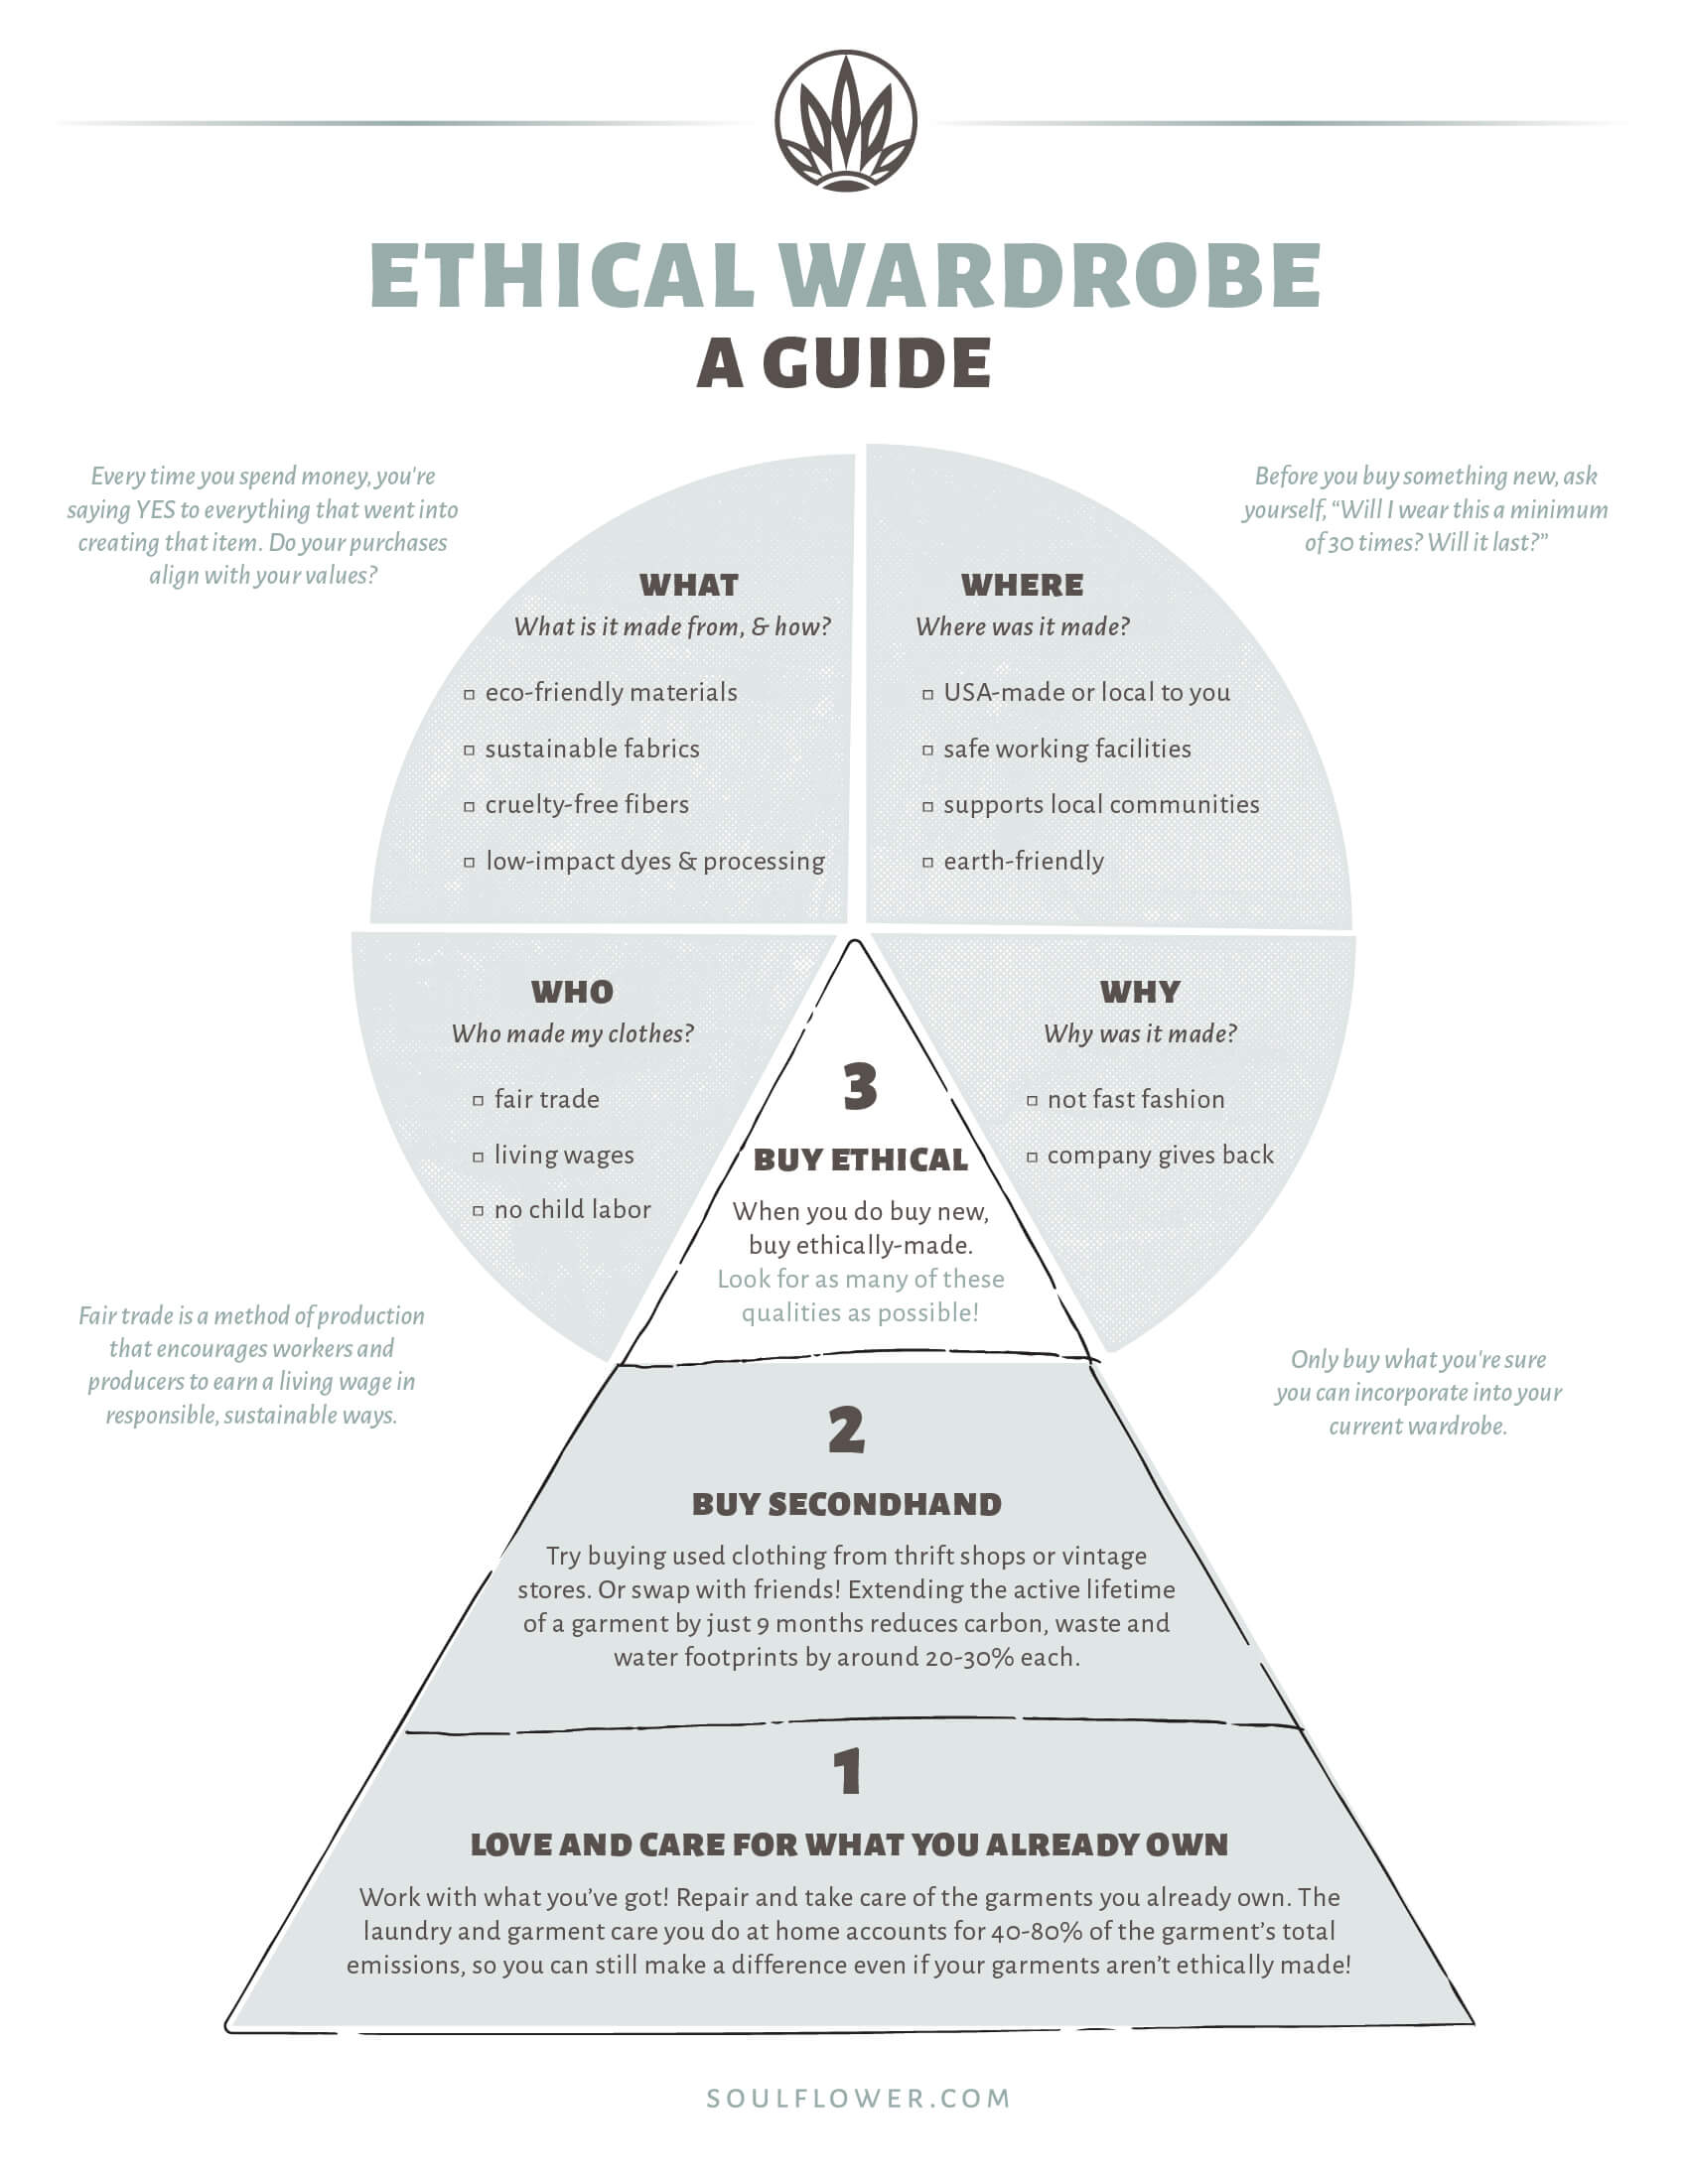 ethical wardrobe in 3 steps - An Ethical Wardrobe in 3 Steps - Sustainable Fashion